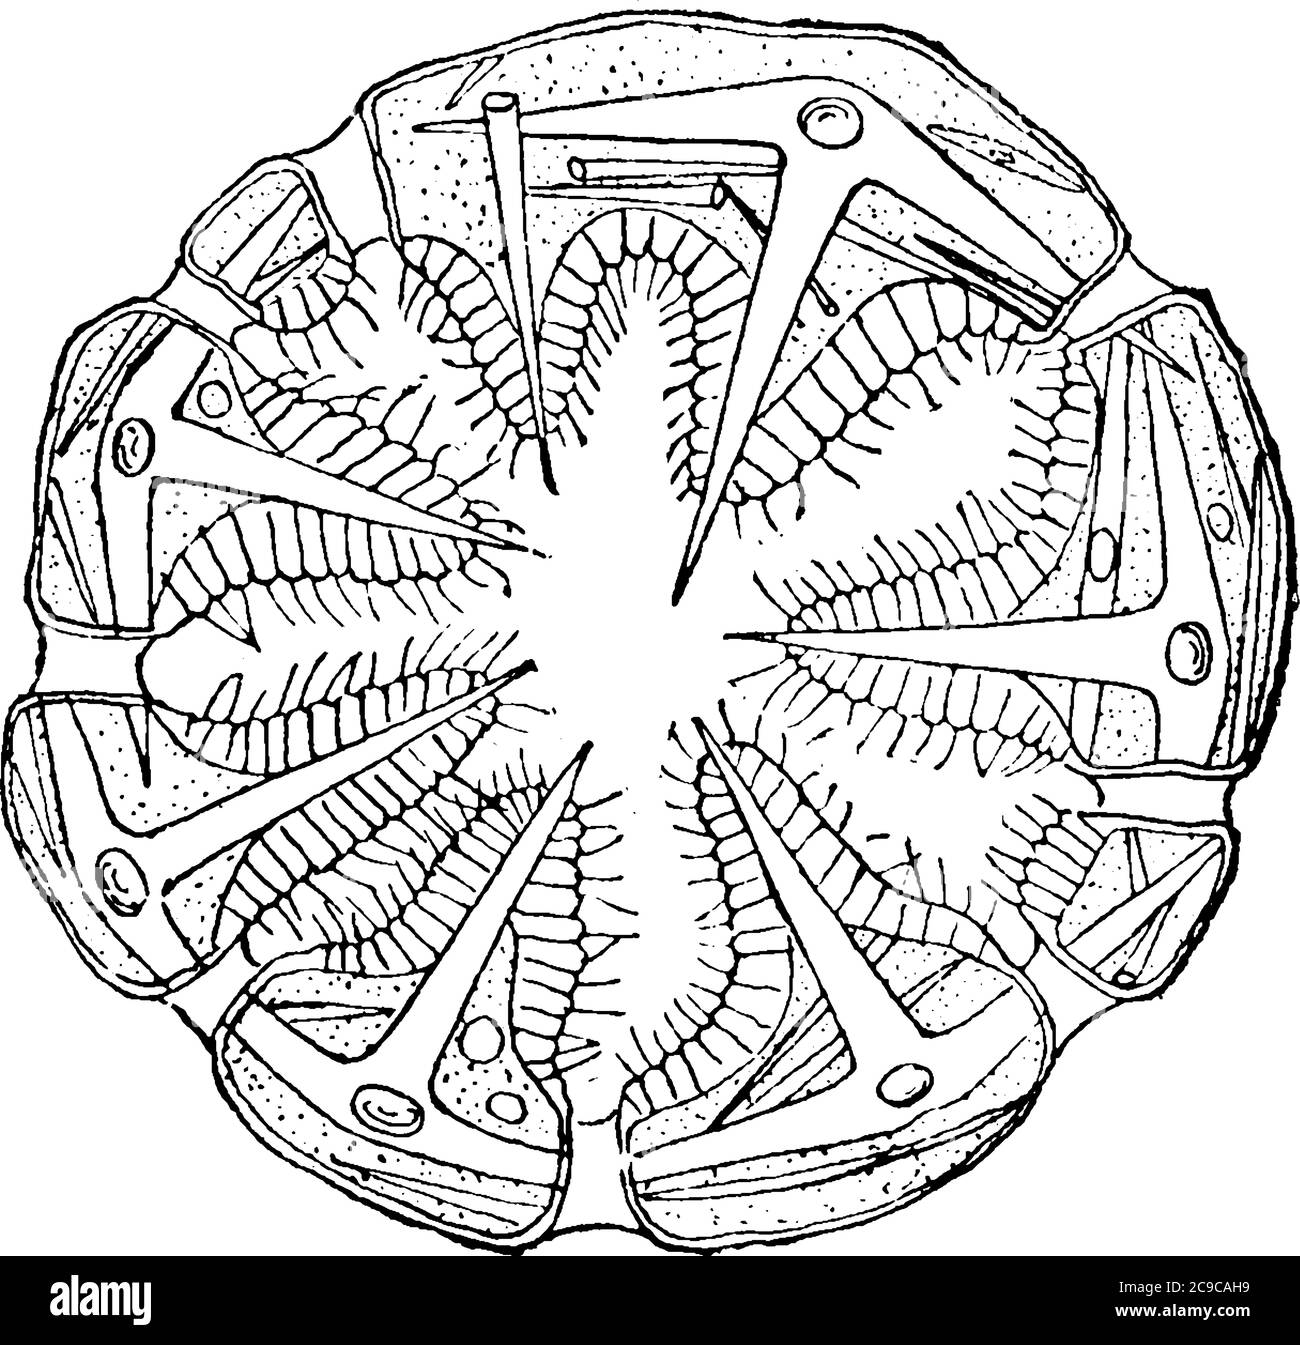 Sponge are multicellular aquatic organisms, members of the phylum Porifera. This figure represent Cross Section Sponge, vintage line drawing or engrav Stock Vector